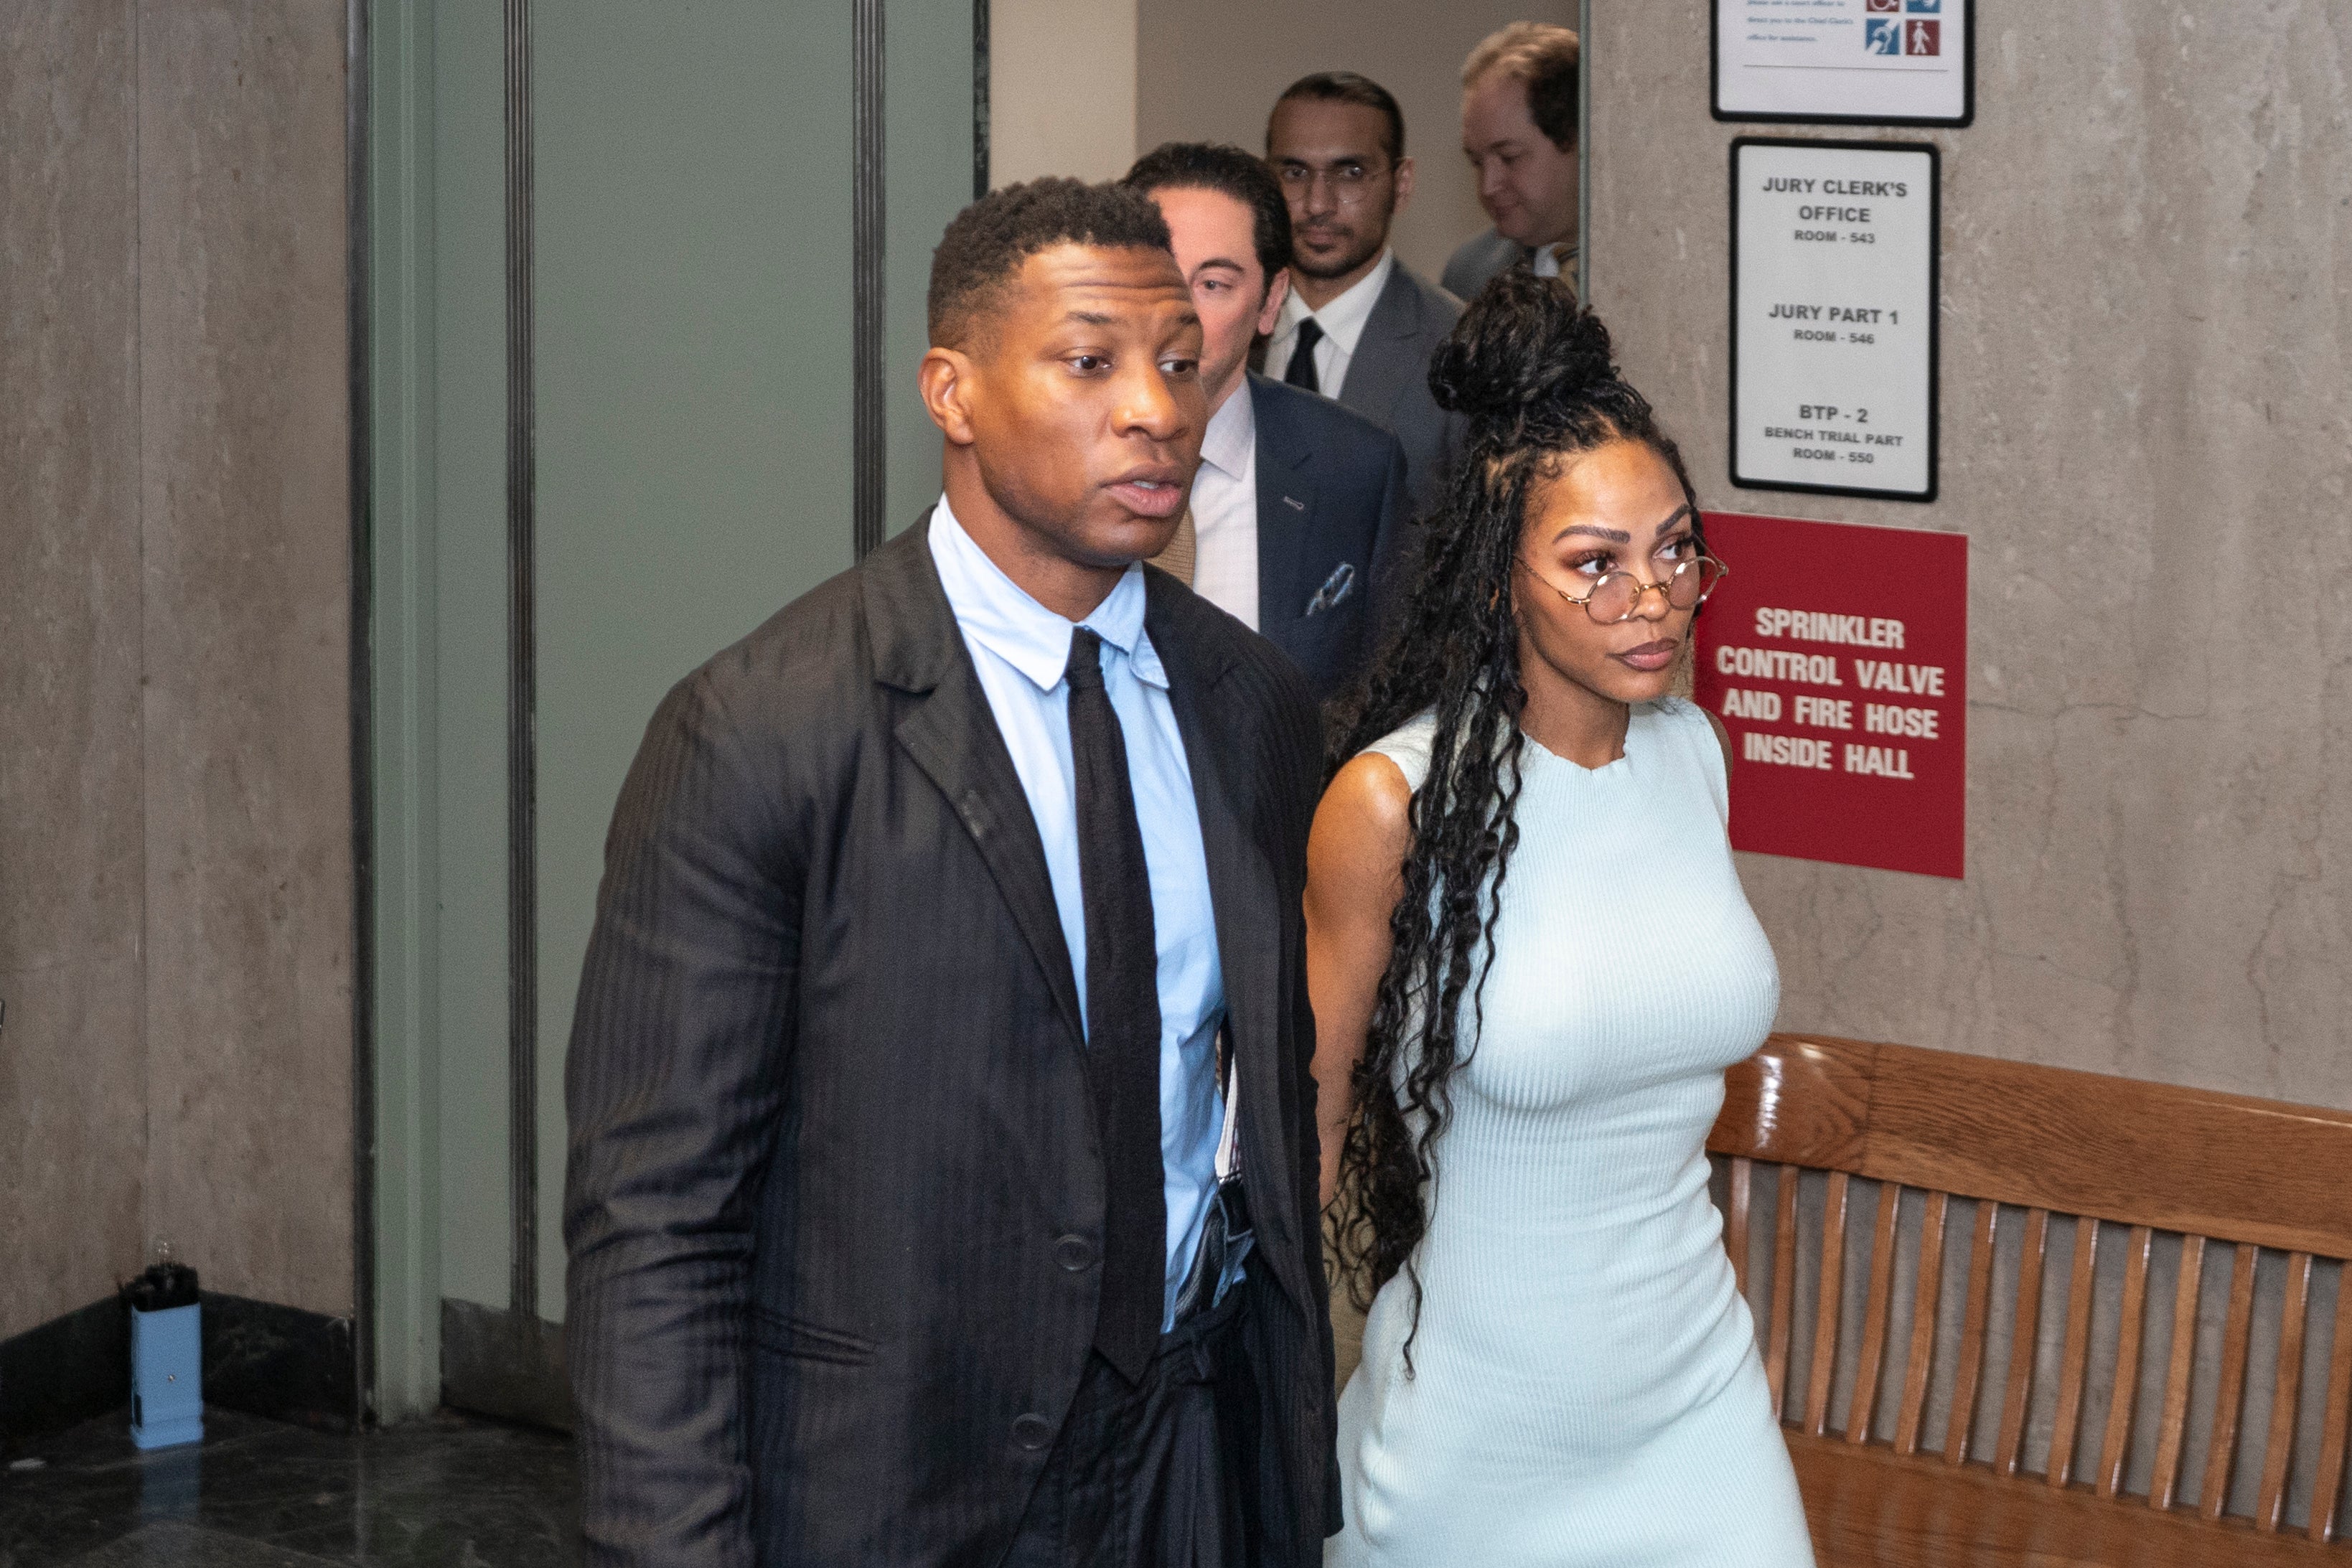 Jonathan Majors, accompanied by girlfriend Meagan Good, enters a courtroom at the Manhattan Criminal Courthouse in New York on 14 December